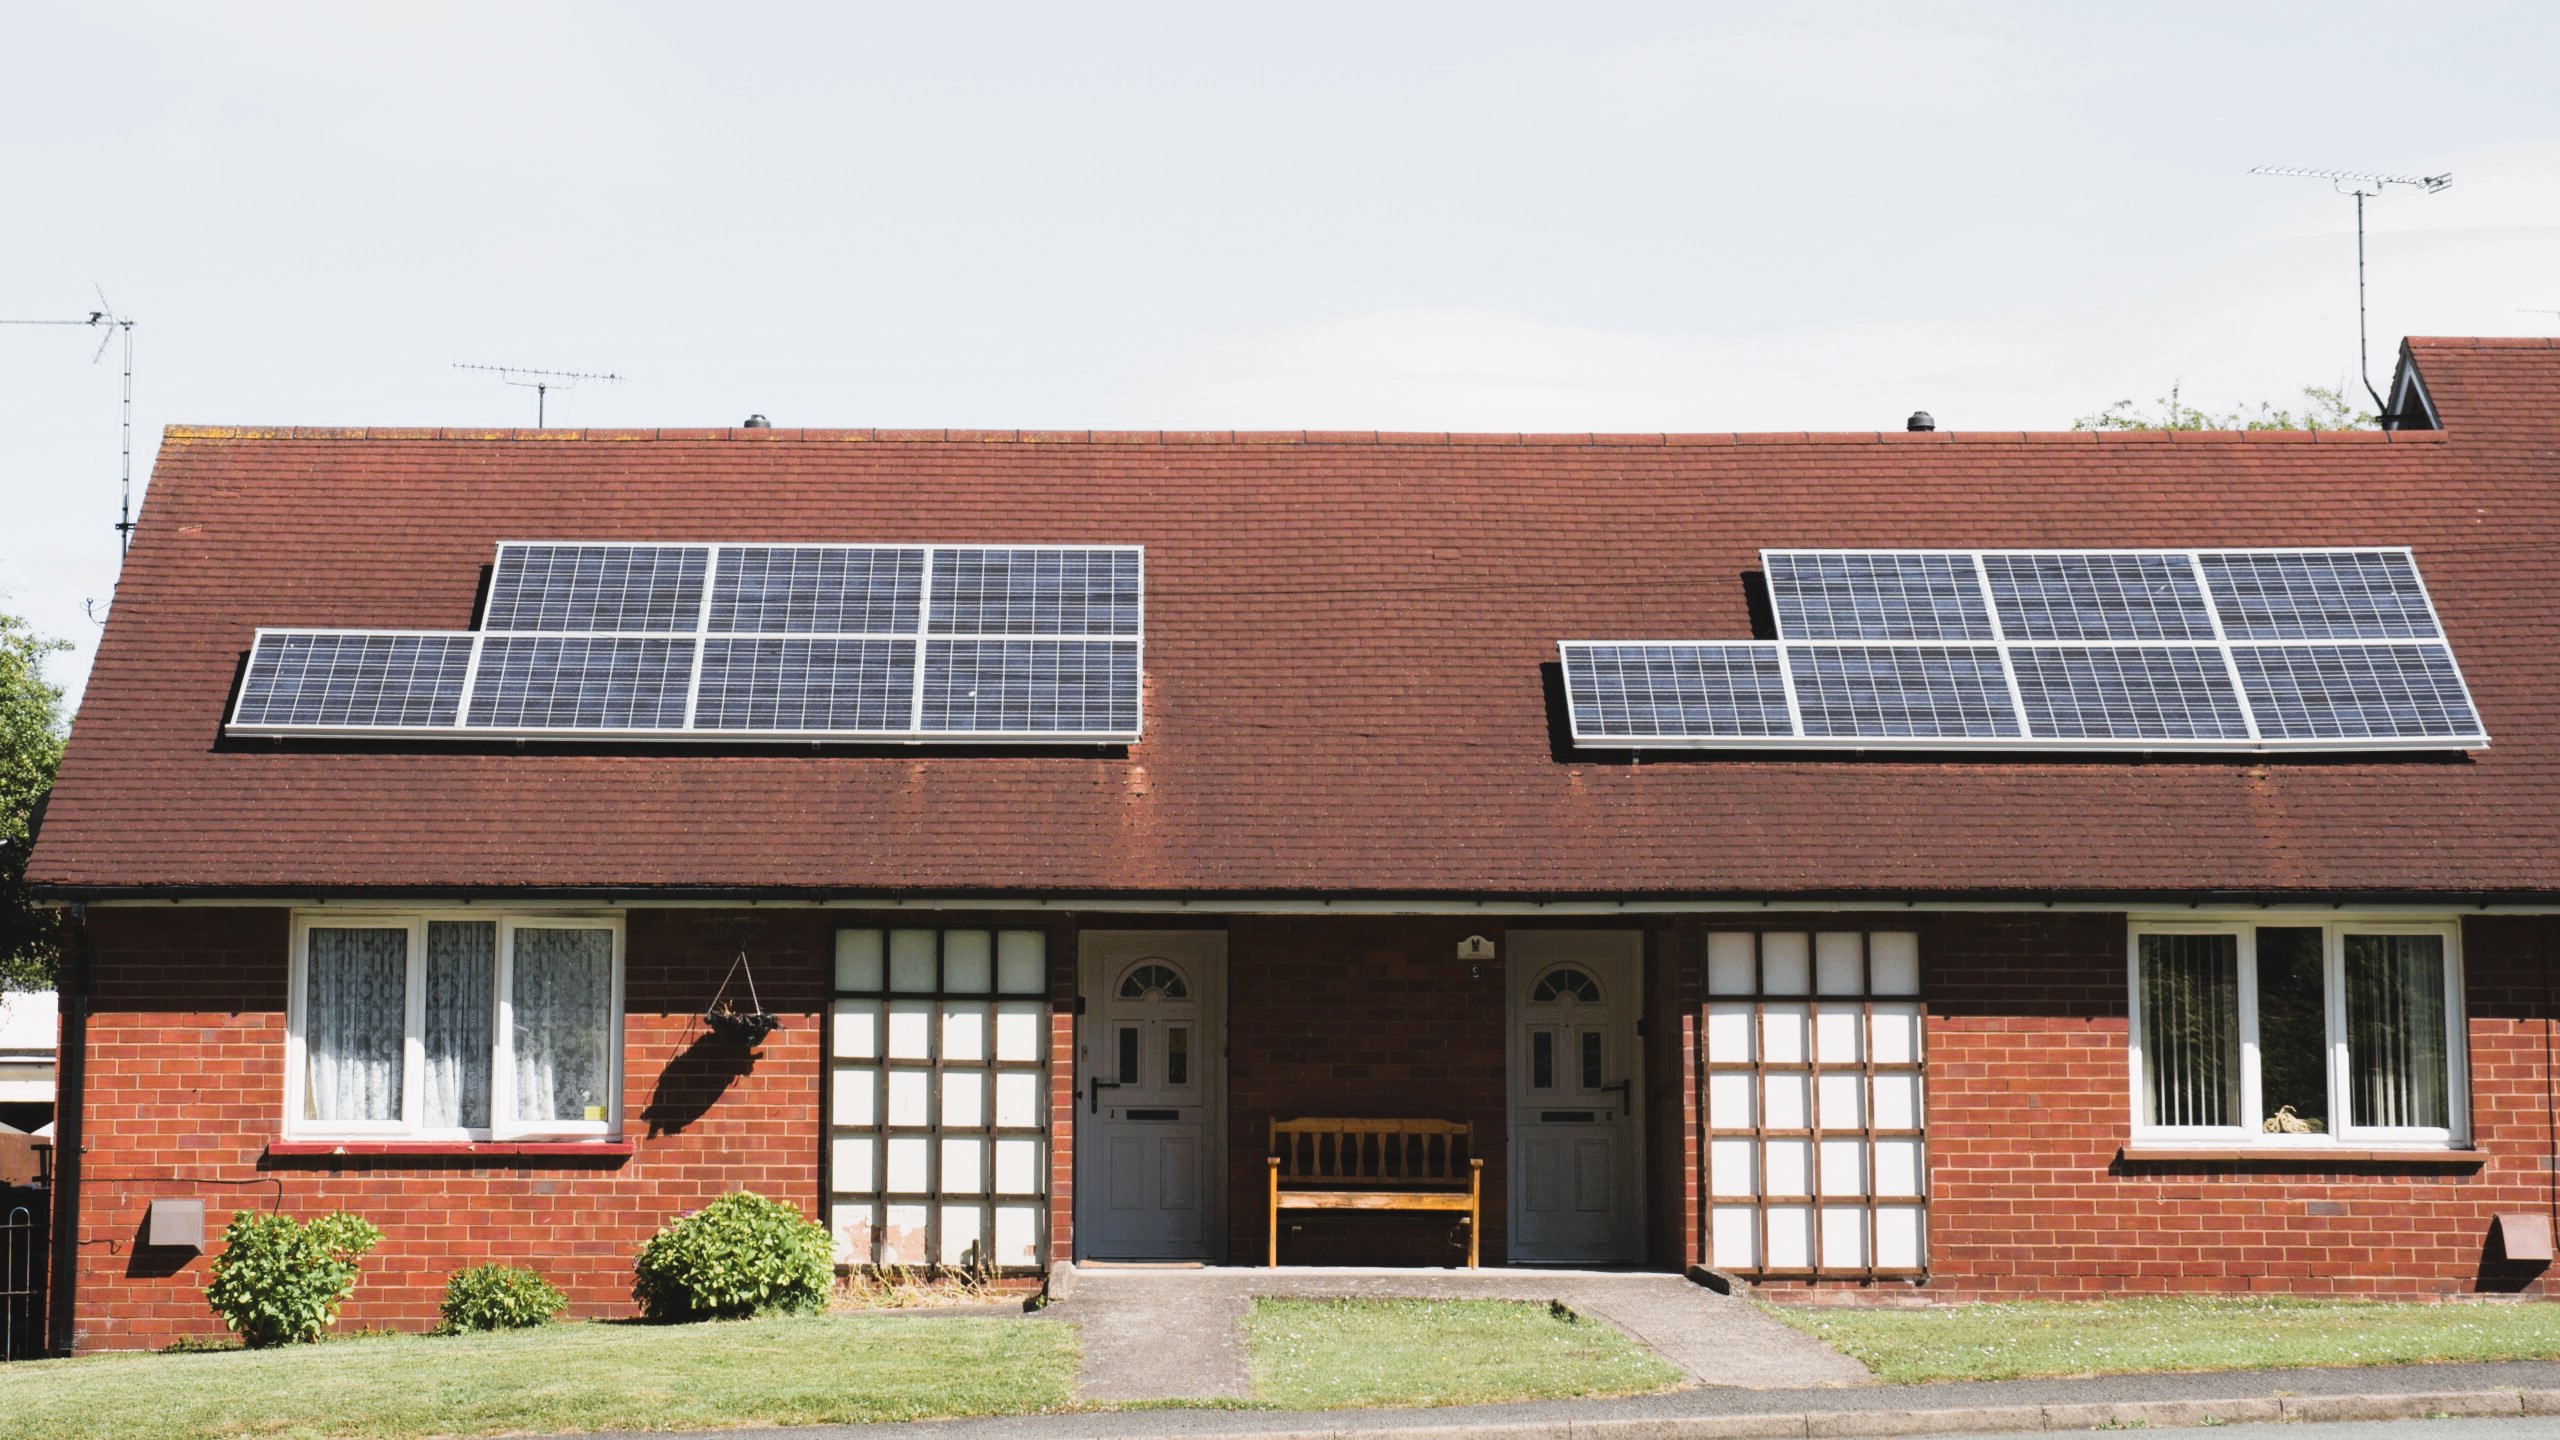 Energy efficient house with solar panels on the roof